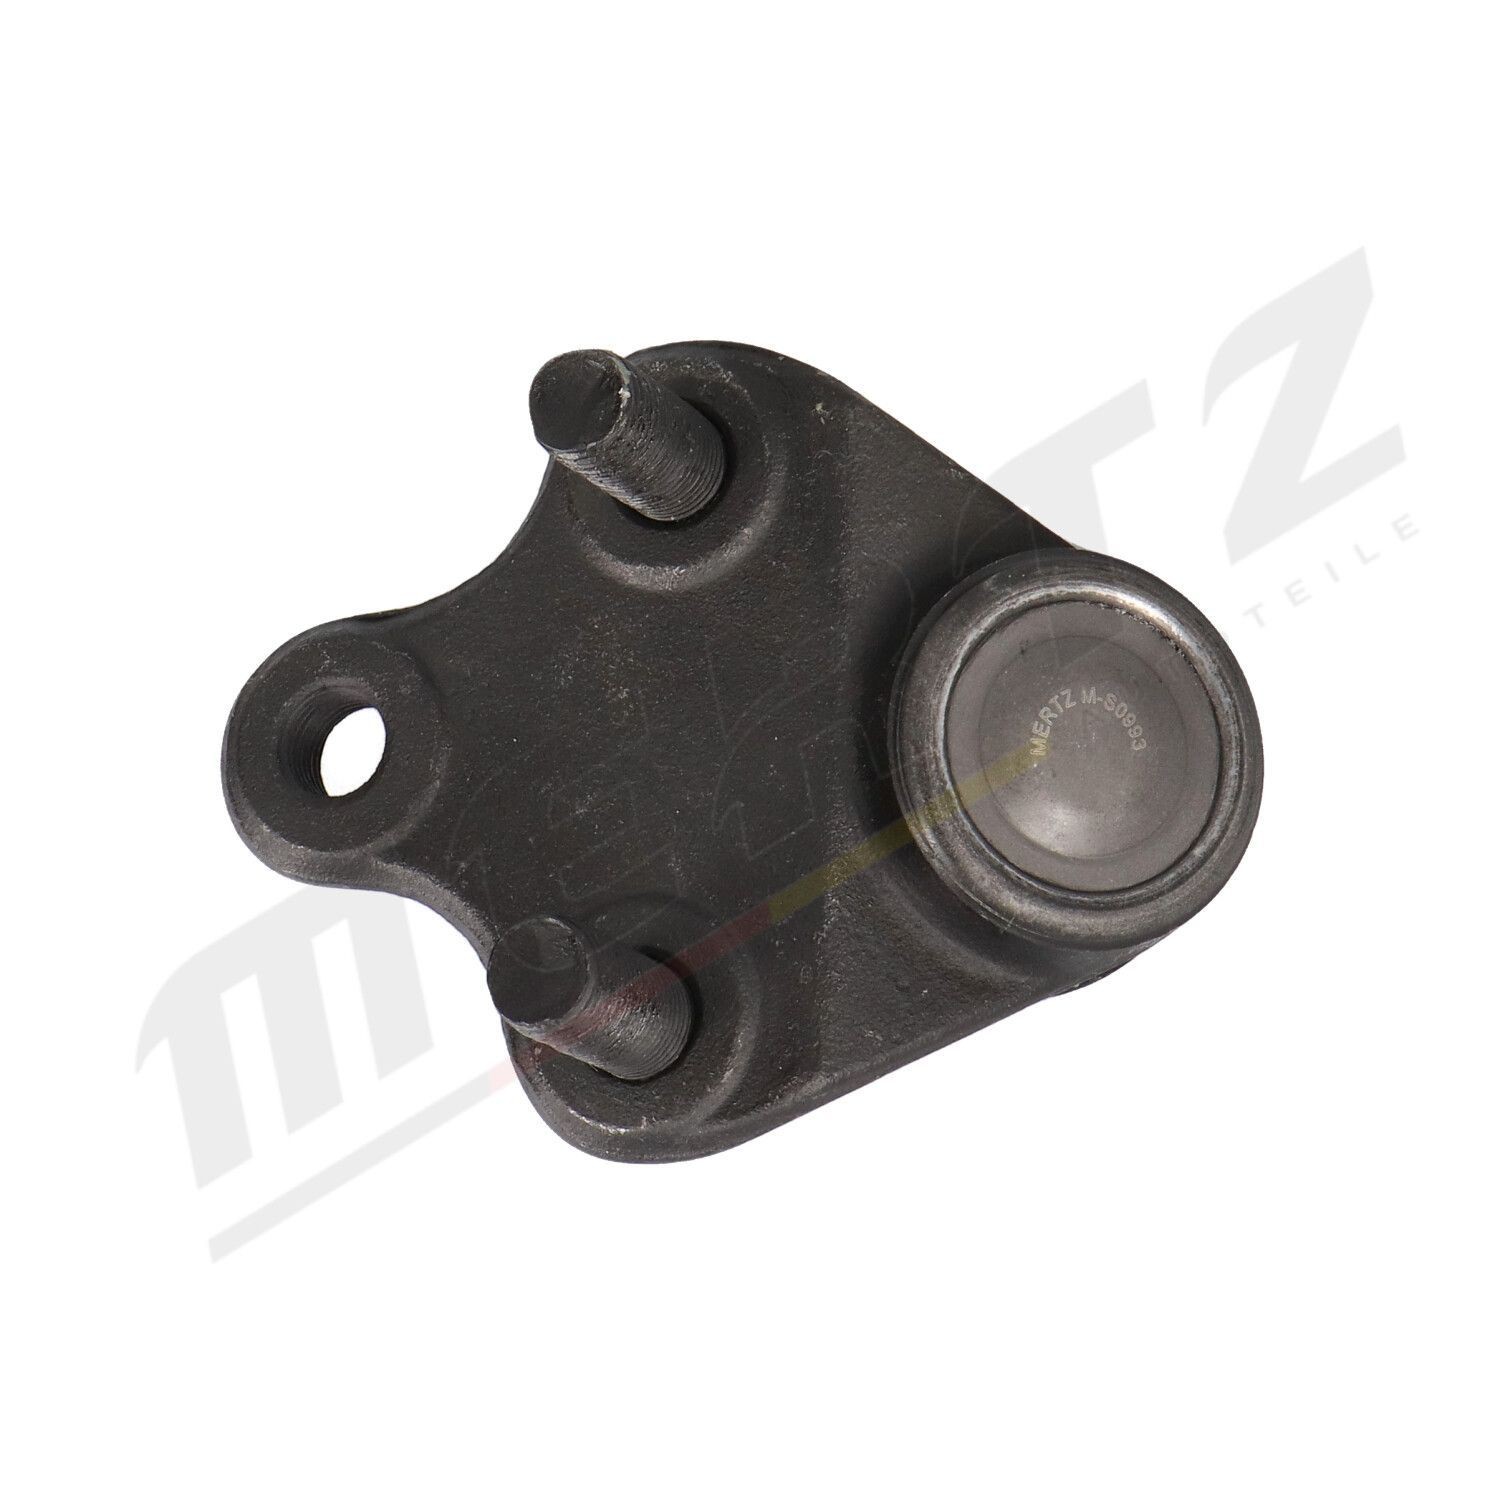 M-S0993 Suspension ball joint M-S0993 MERTZ Front Axle Left, Front Axle Right, with crown nut, M14x1,5mm